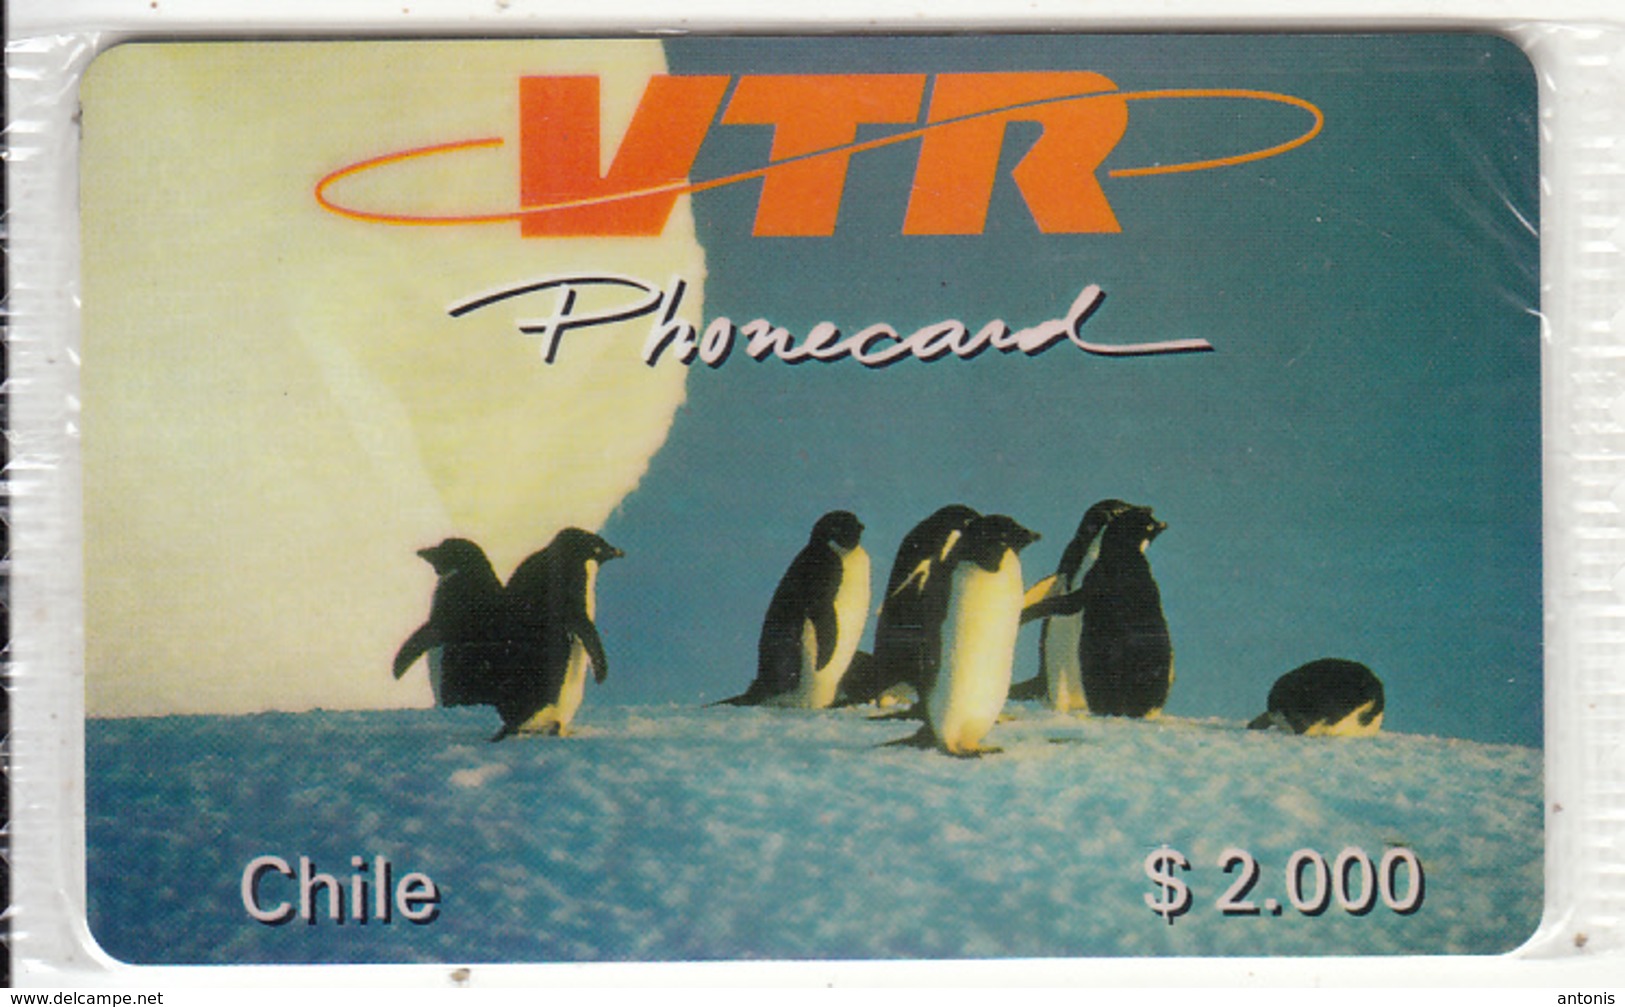 CHILE - Pinguins, VTR Prepaid Card $2000, Tirage 1000, Mint - Chile